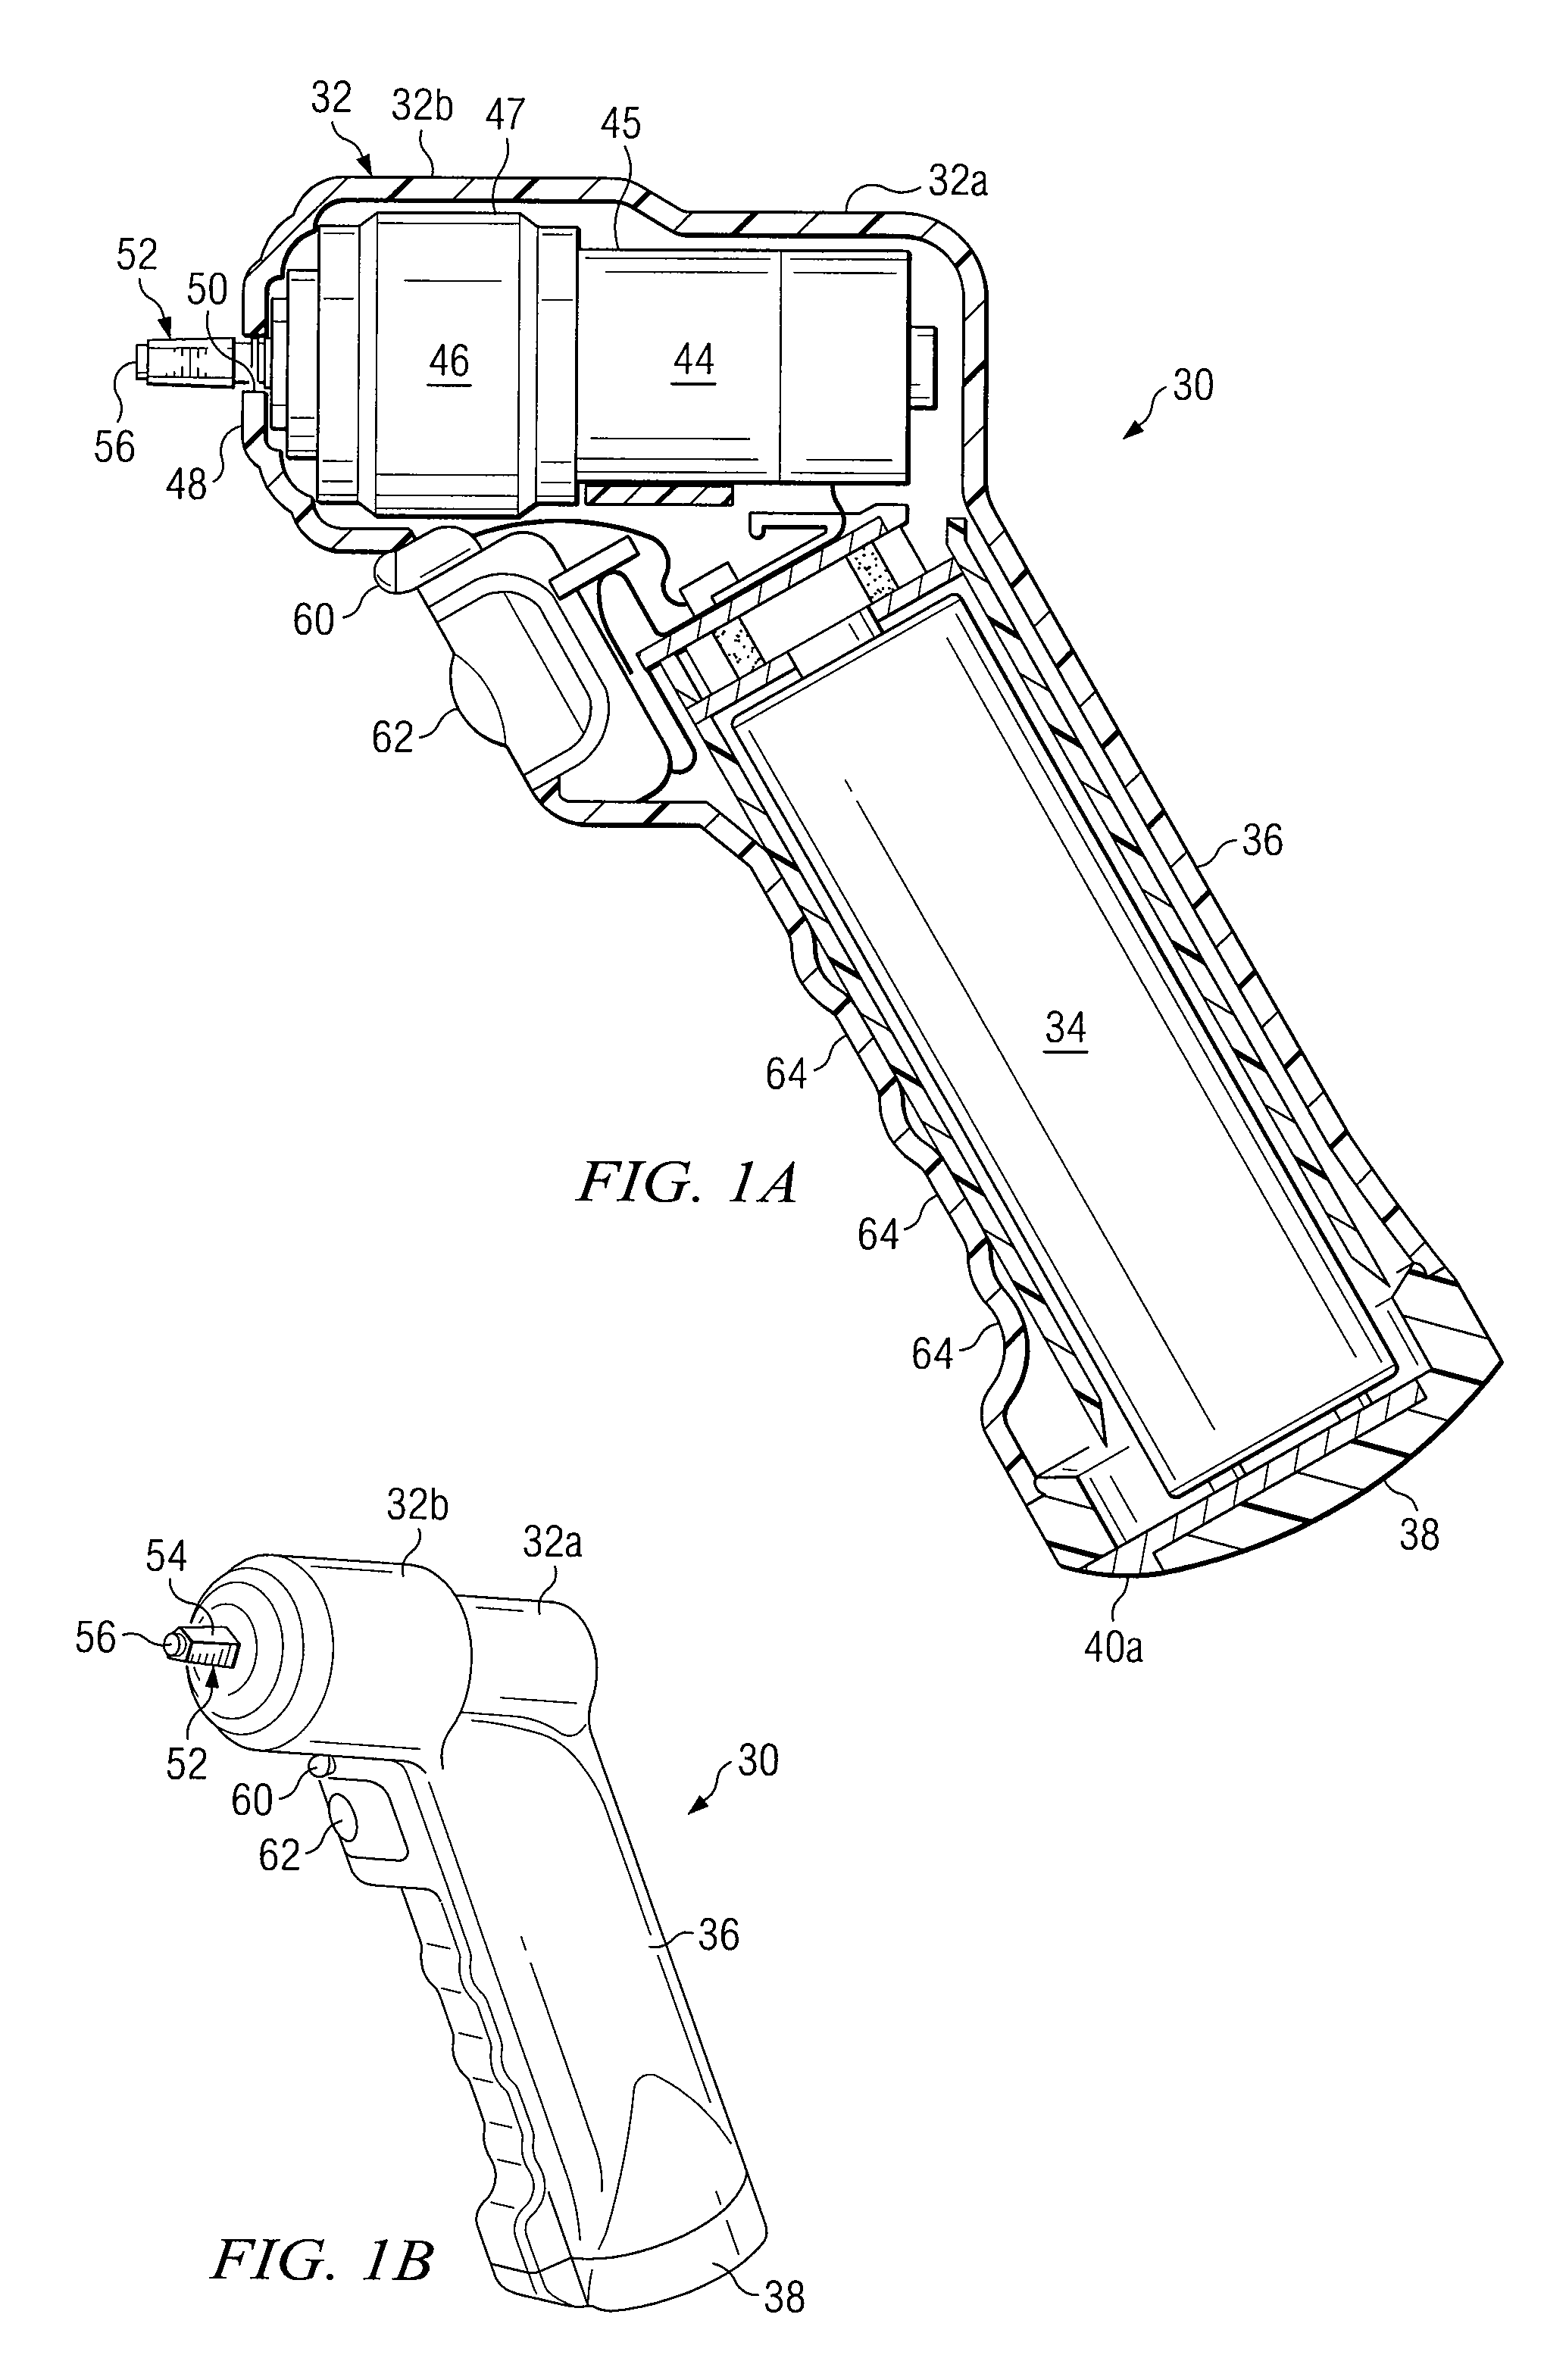 Powered Drivers, Intraosseous Devices And Methods To Access Bone Marrow